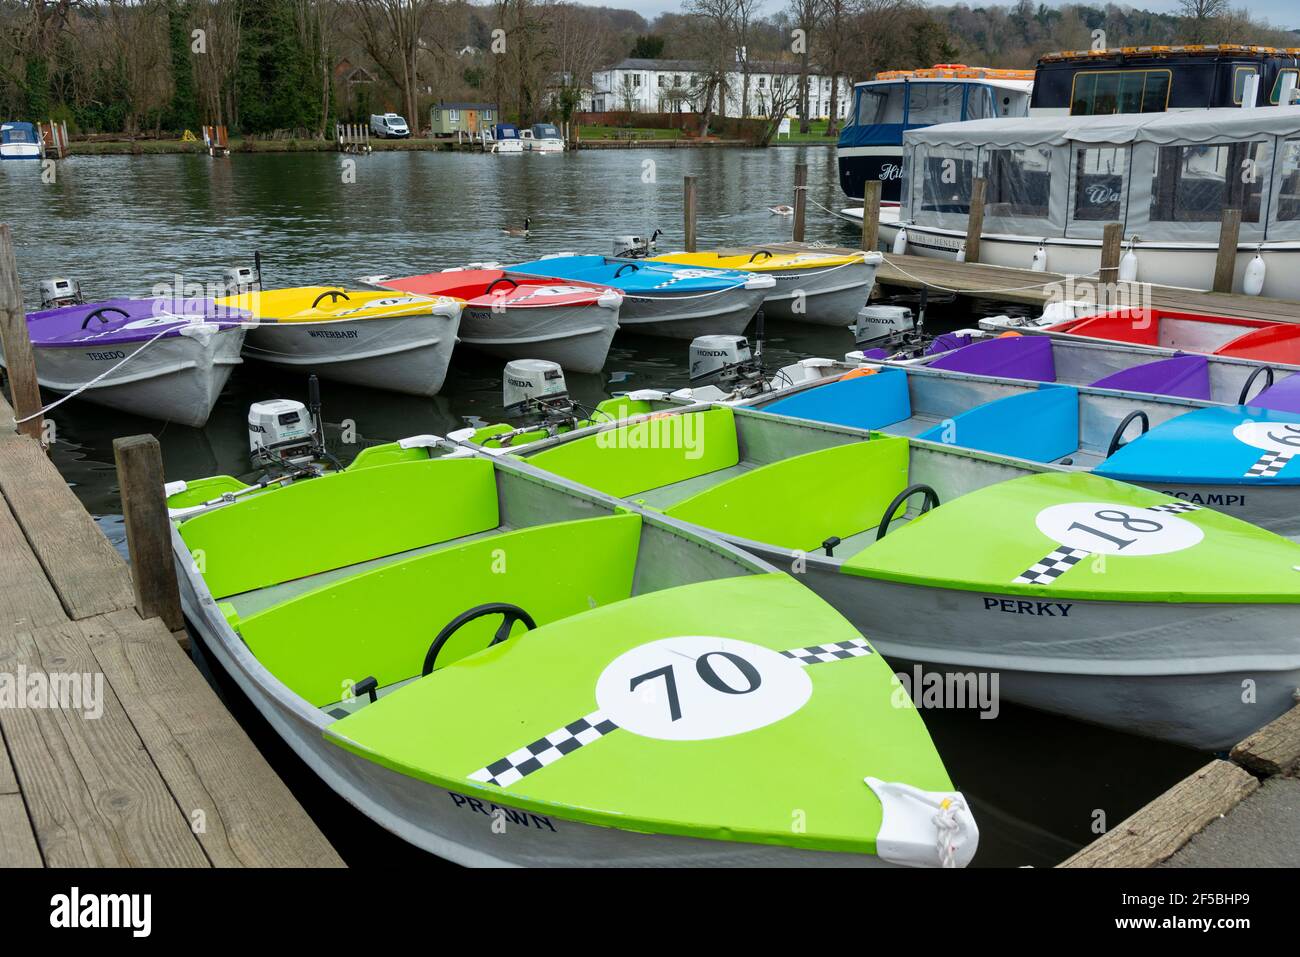 Colourful hire boats waiting for customers when lockdown ends - Henley-on-Thames, Oxfordshire, England, UK Stock Photo